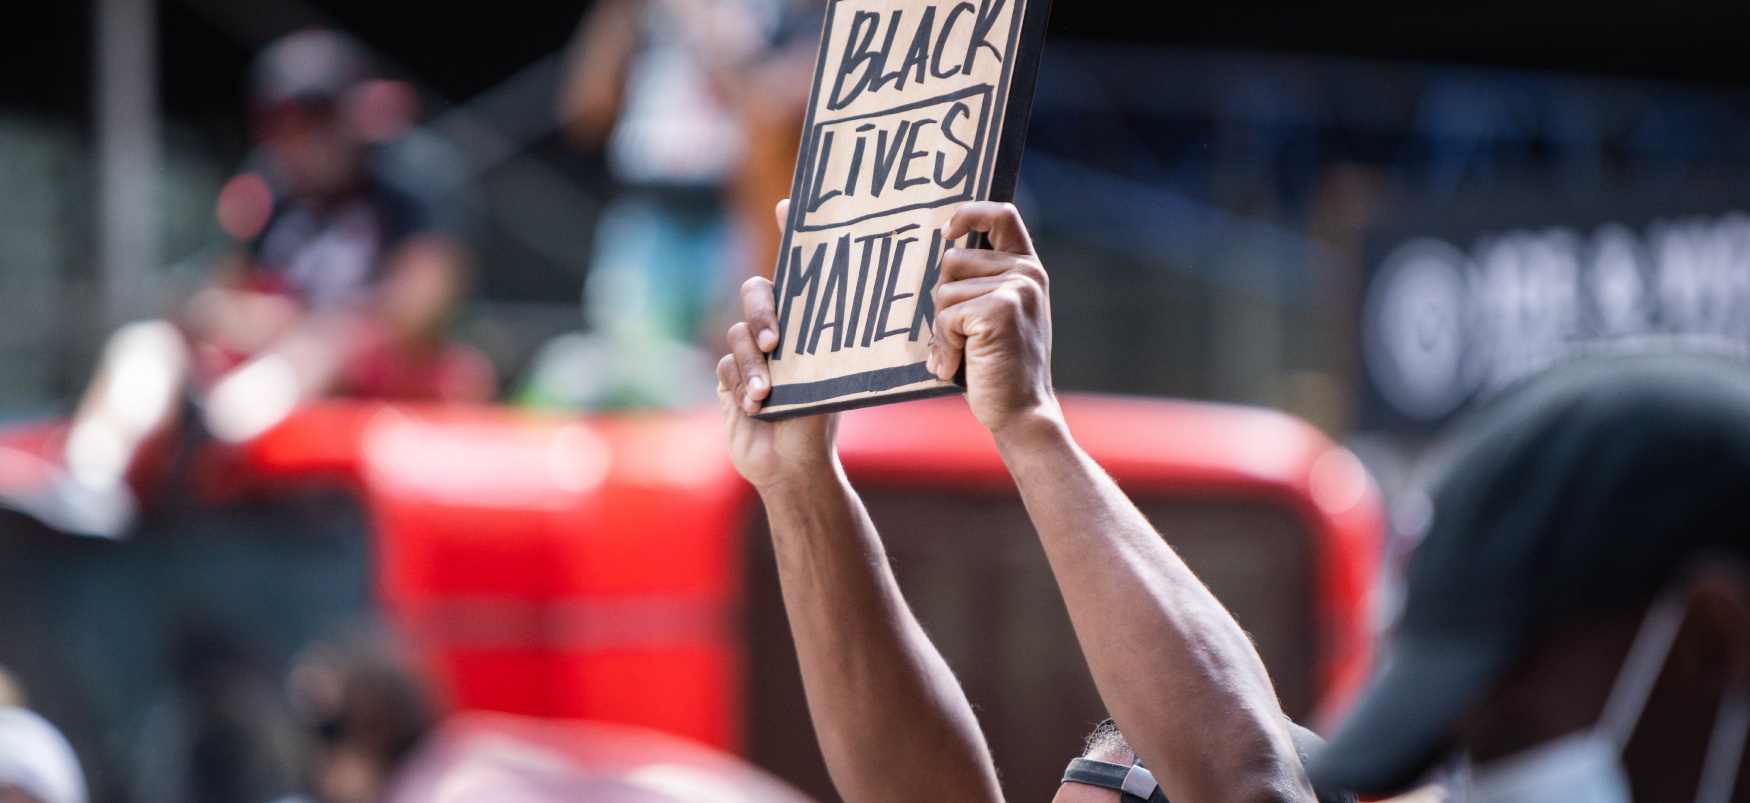 Protester in crowd holding up a Black Lives Matter placard on cardboard.